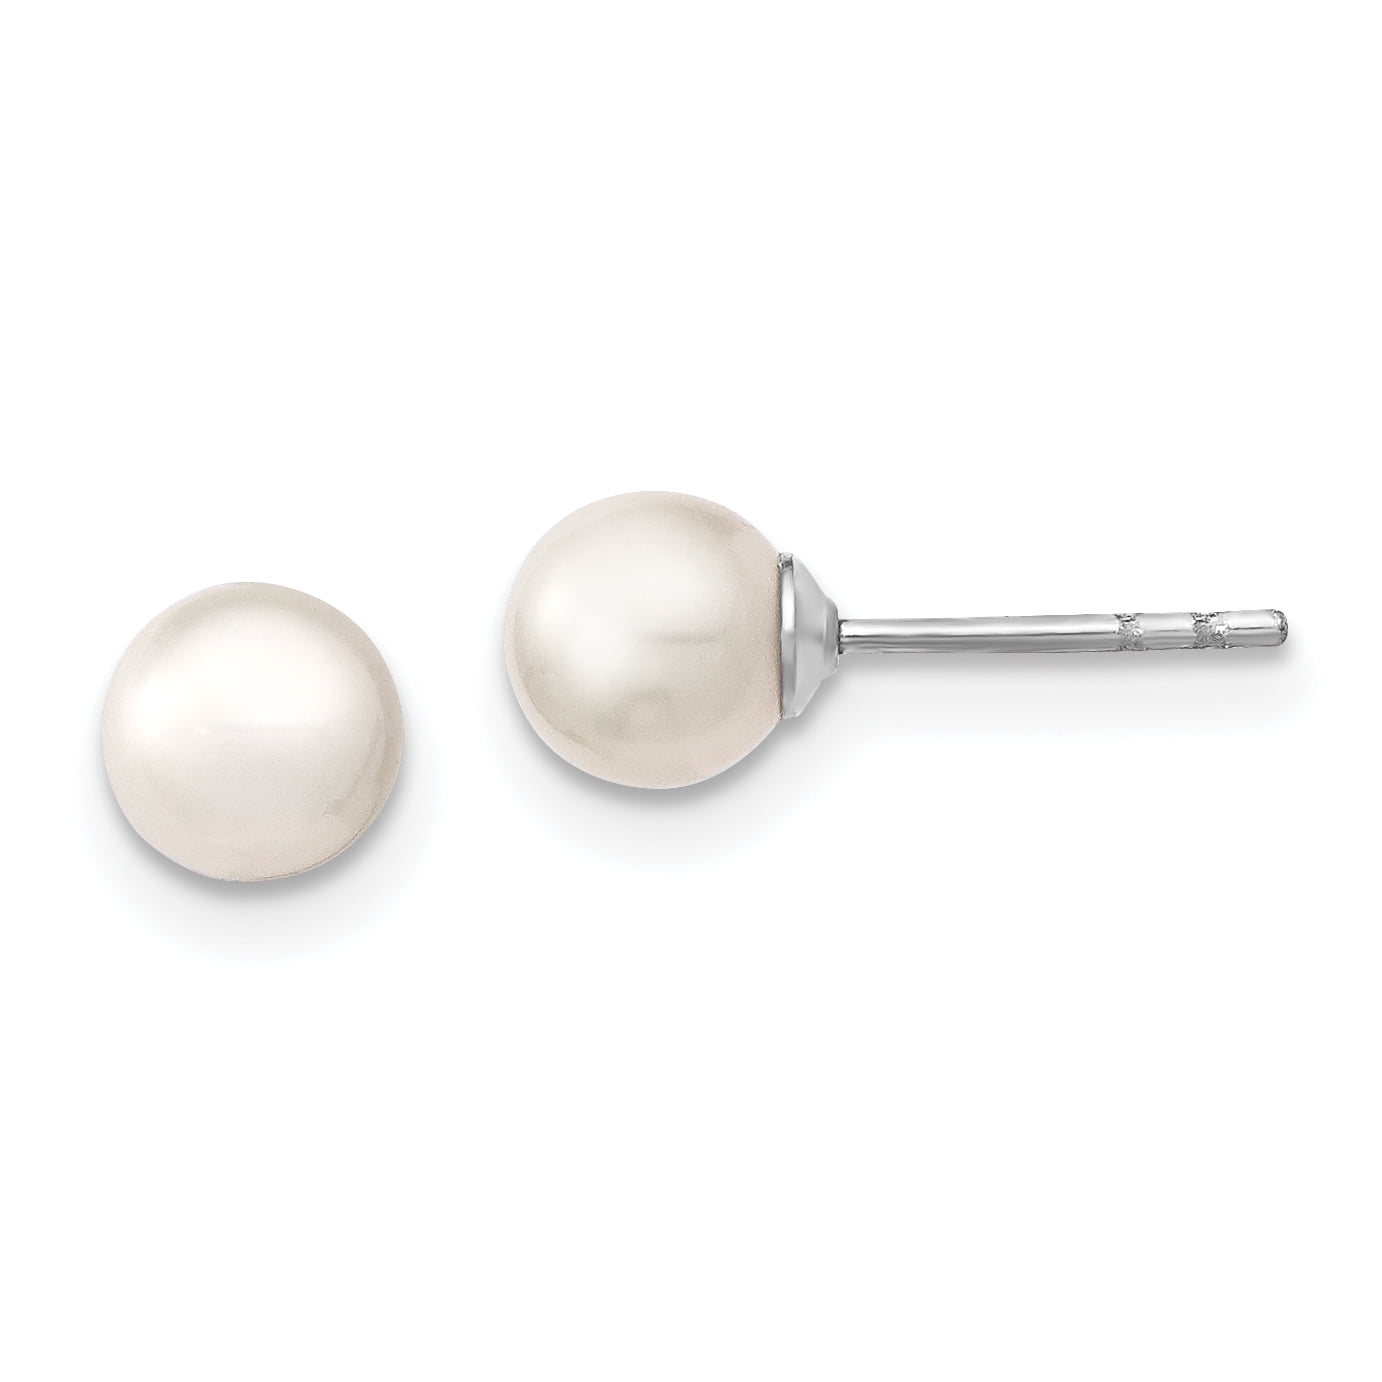 Sterling Silver RH 5-6mm White FW Cultured Round Pearl Stud Earrings QE12732 (5 to 6mm X 5 to 6mm)